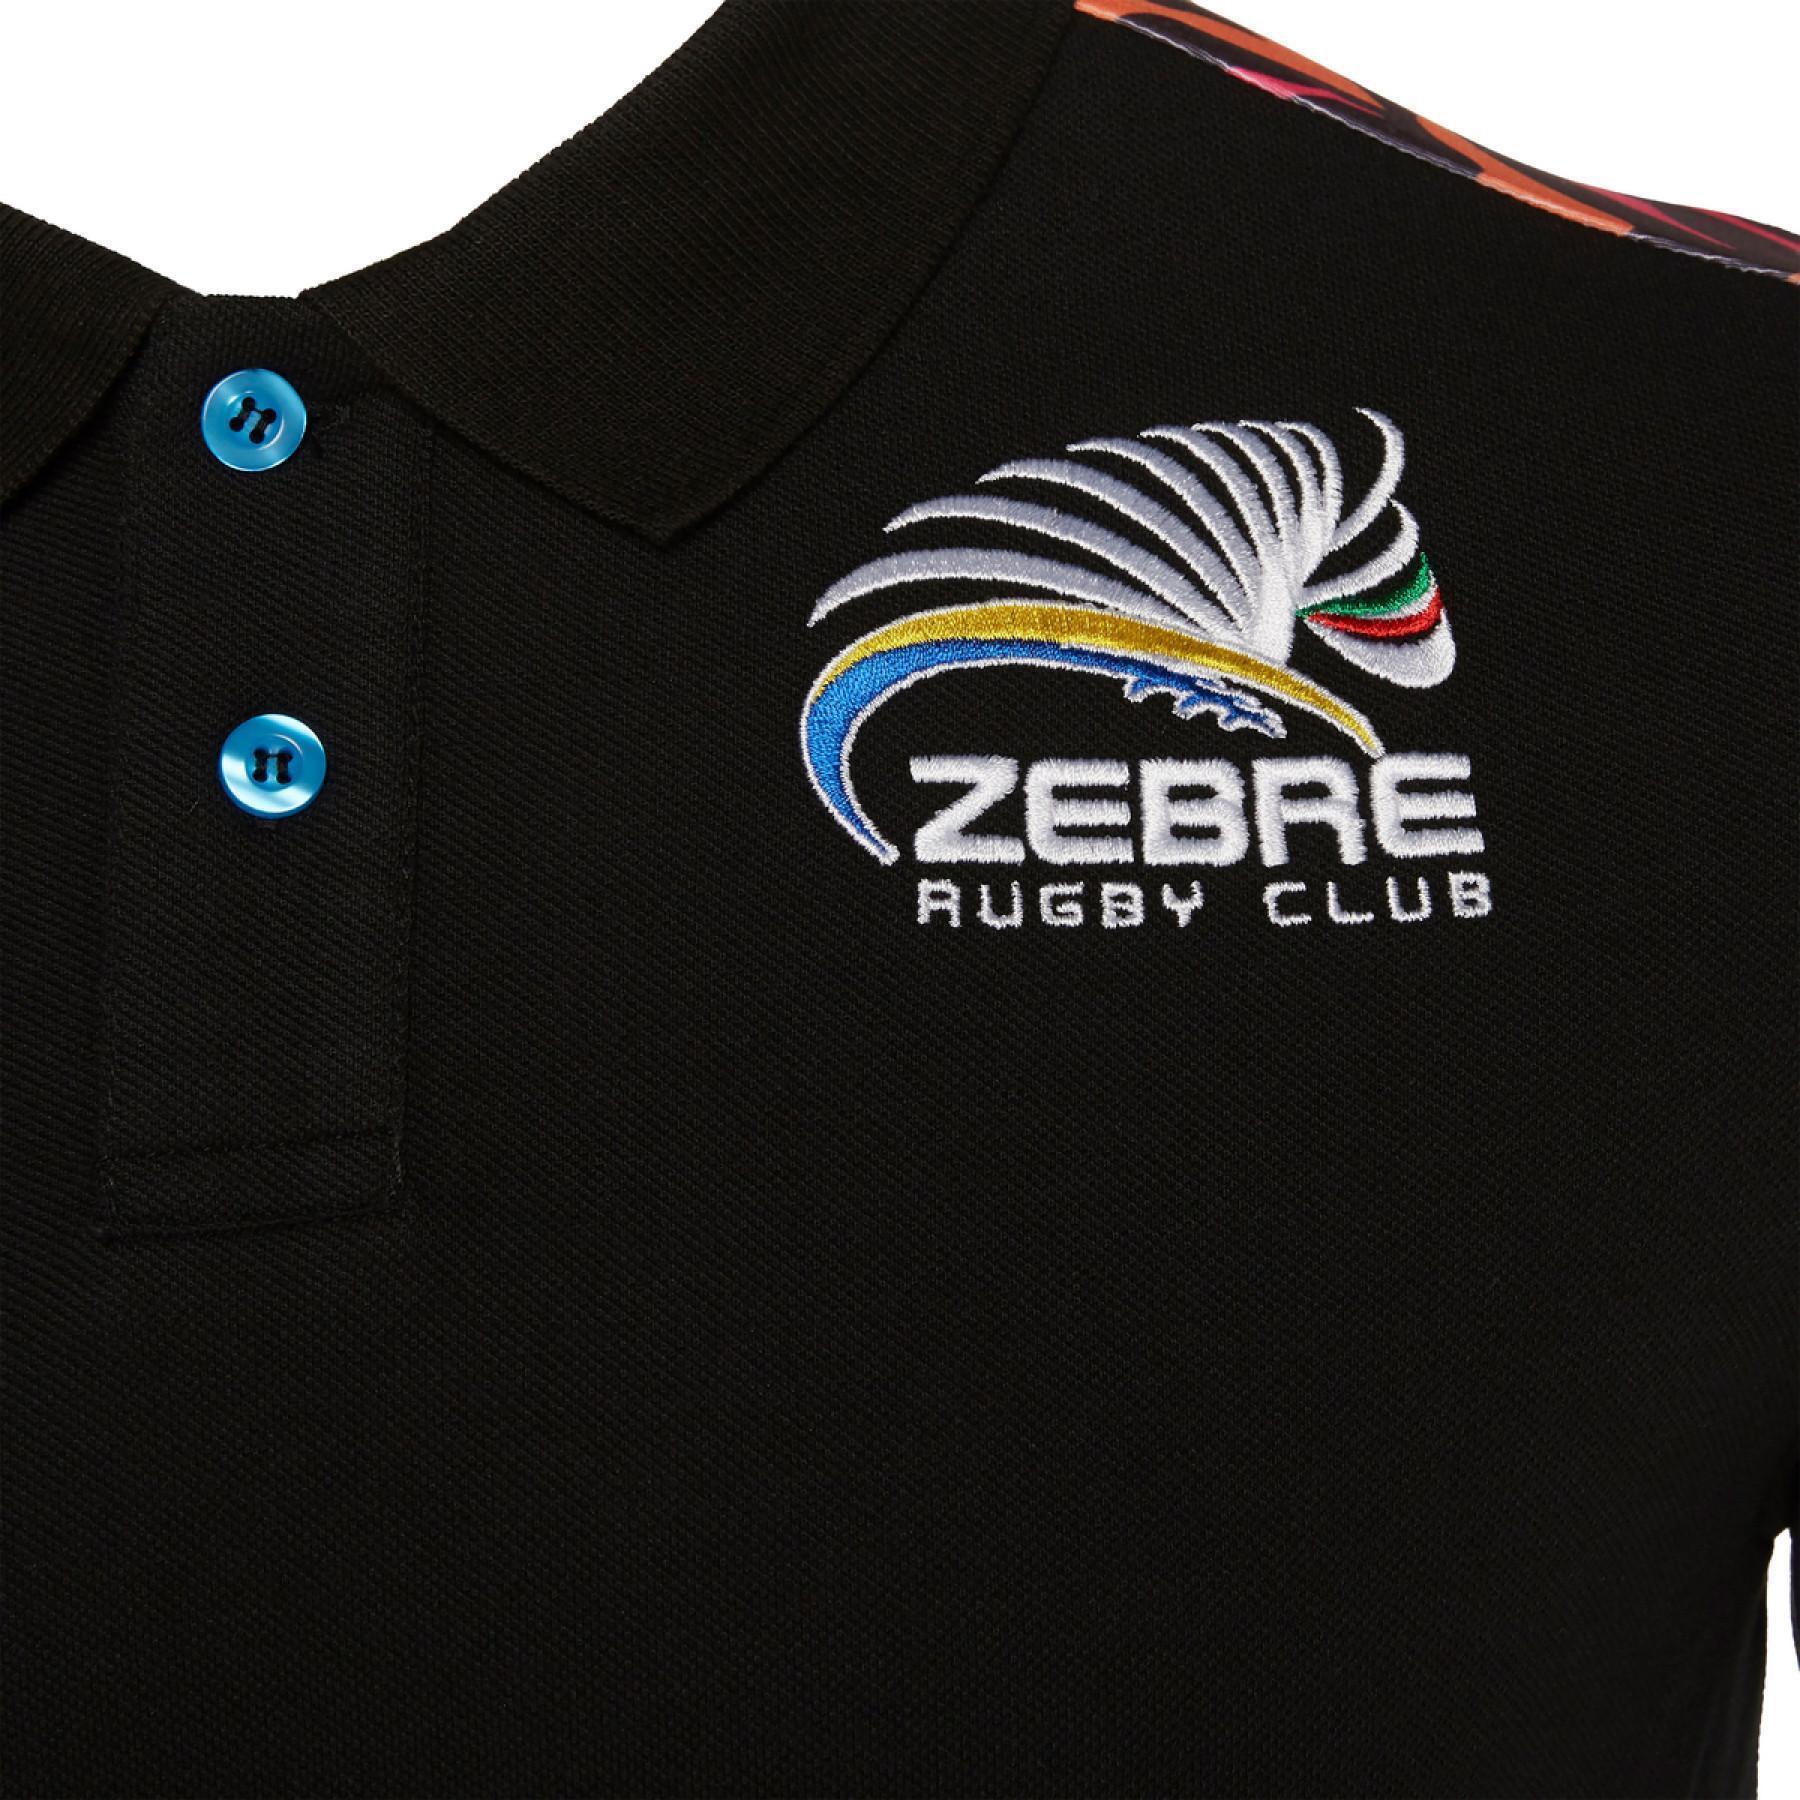 Polo travel zebre rugby 2019/2020